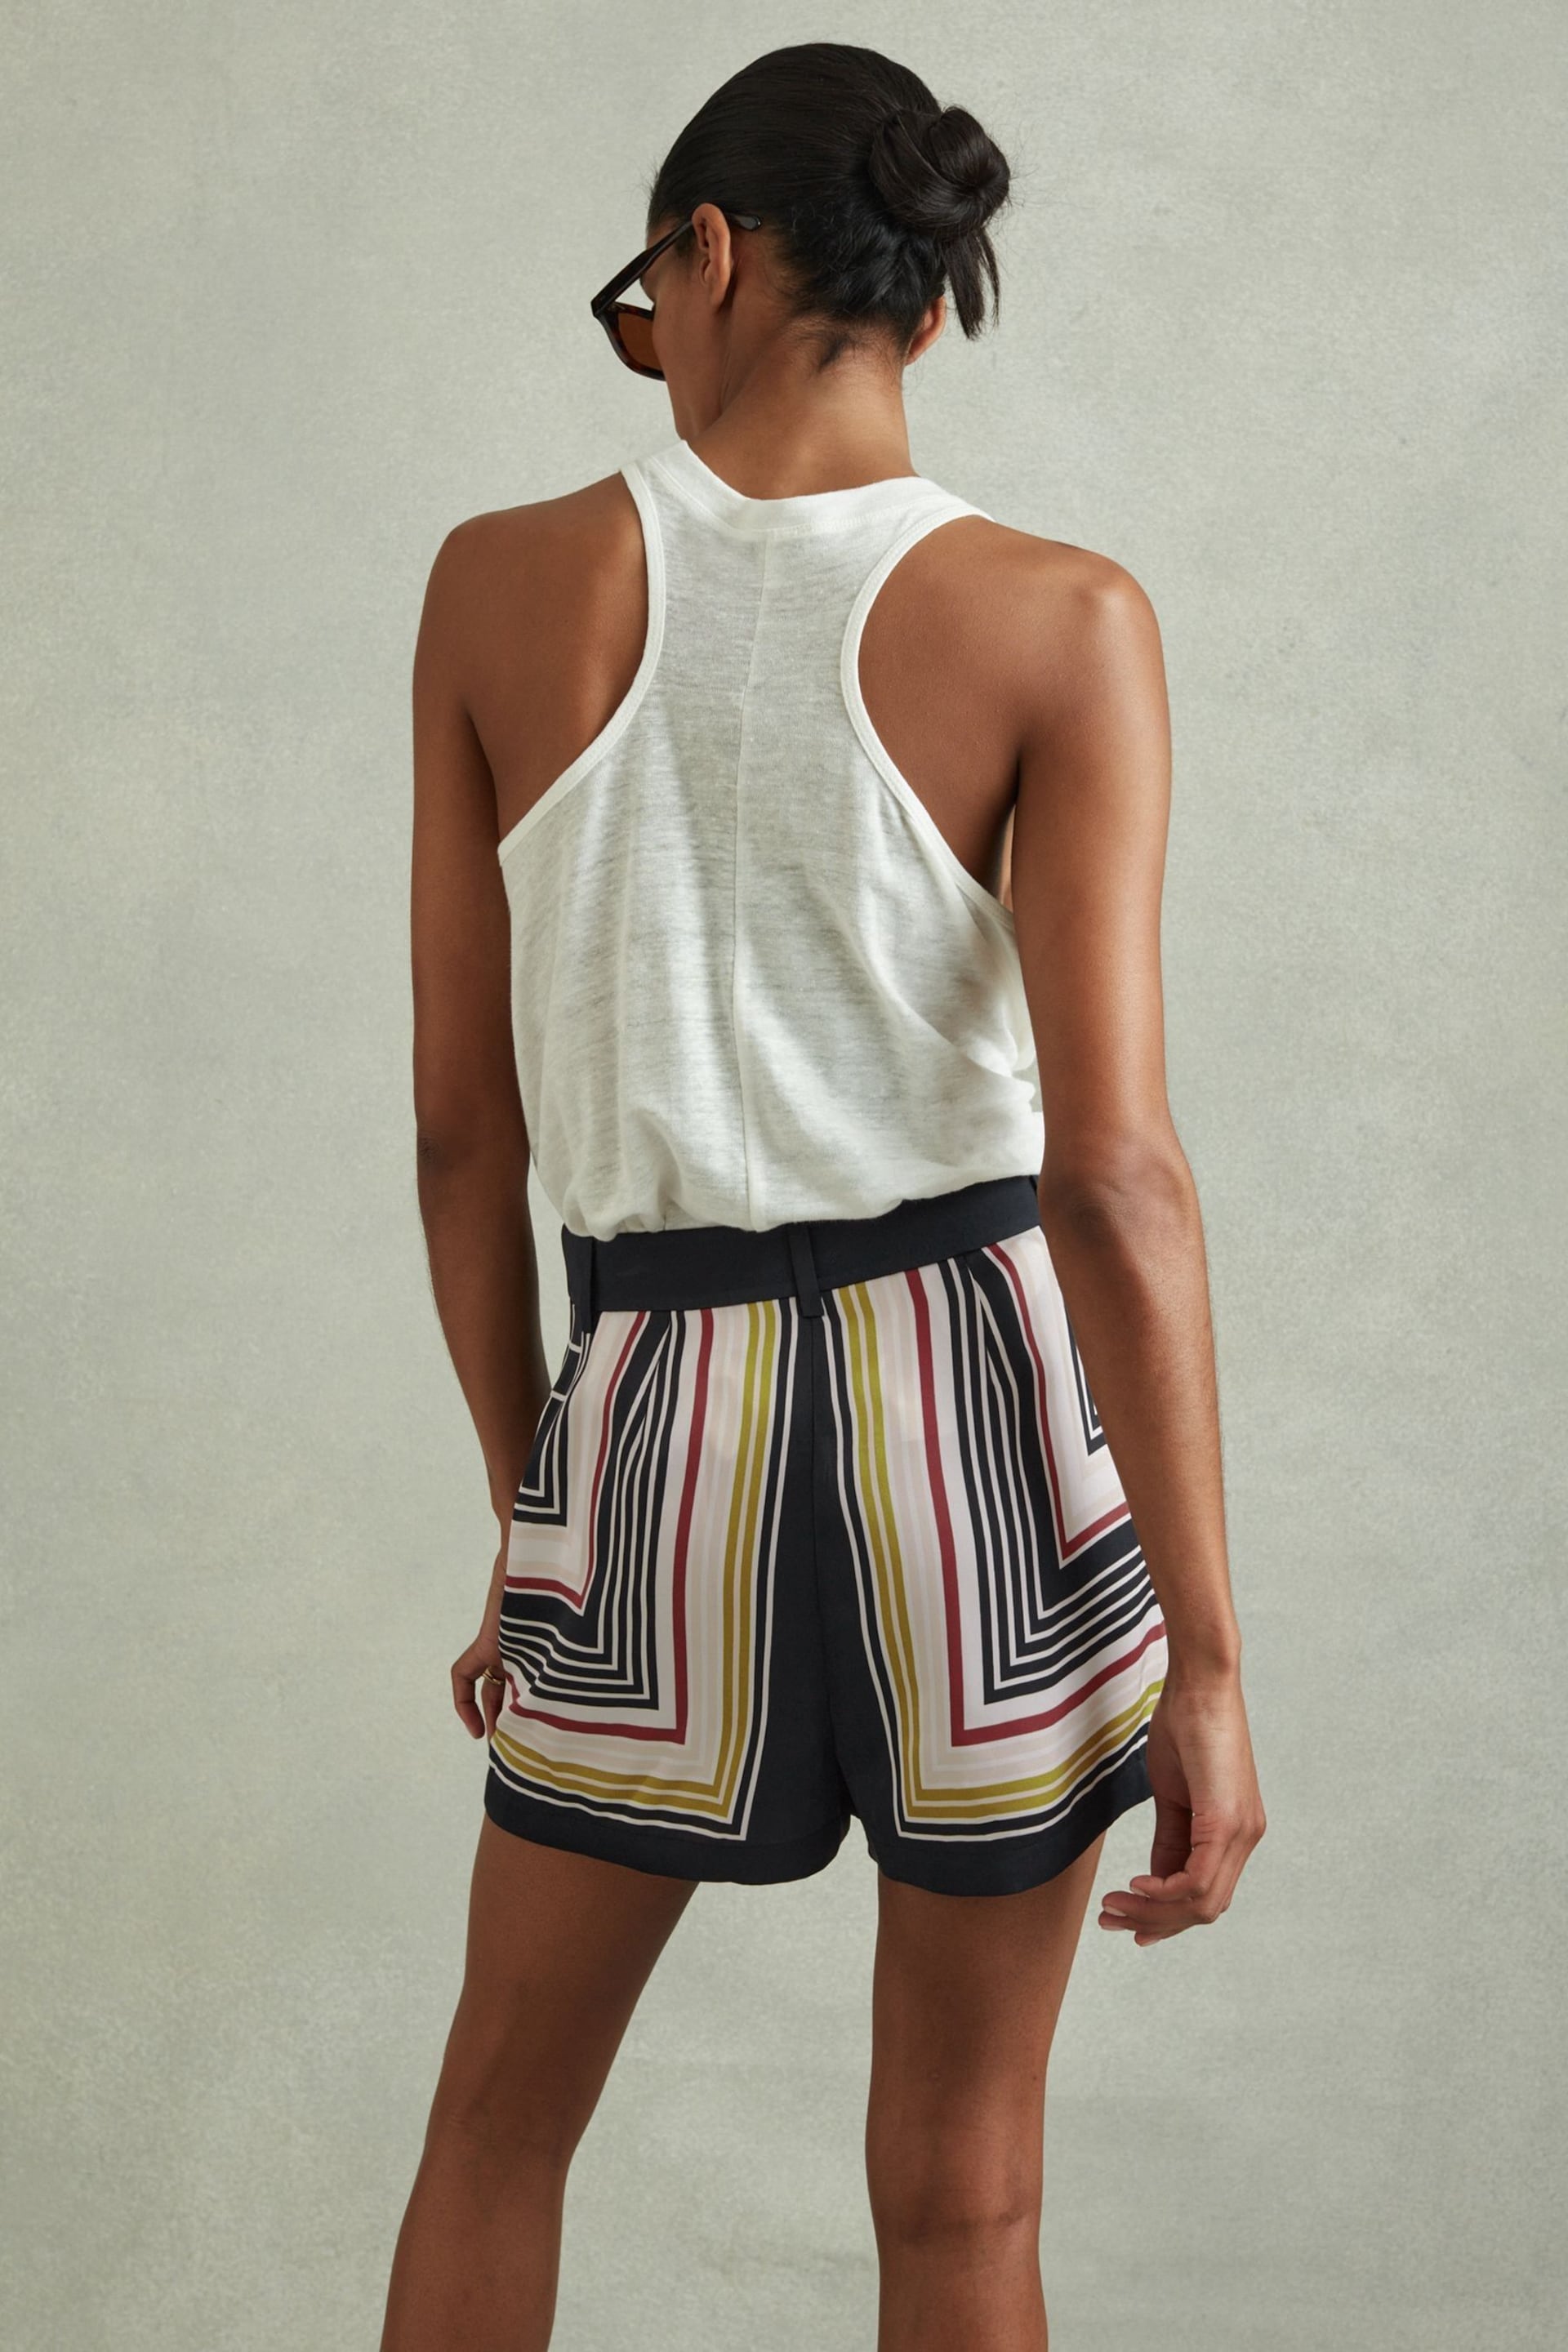 Reiss Navy Print Lilly Satin Striped Shorts - Image 5 of 6